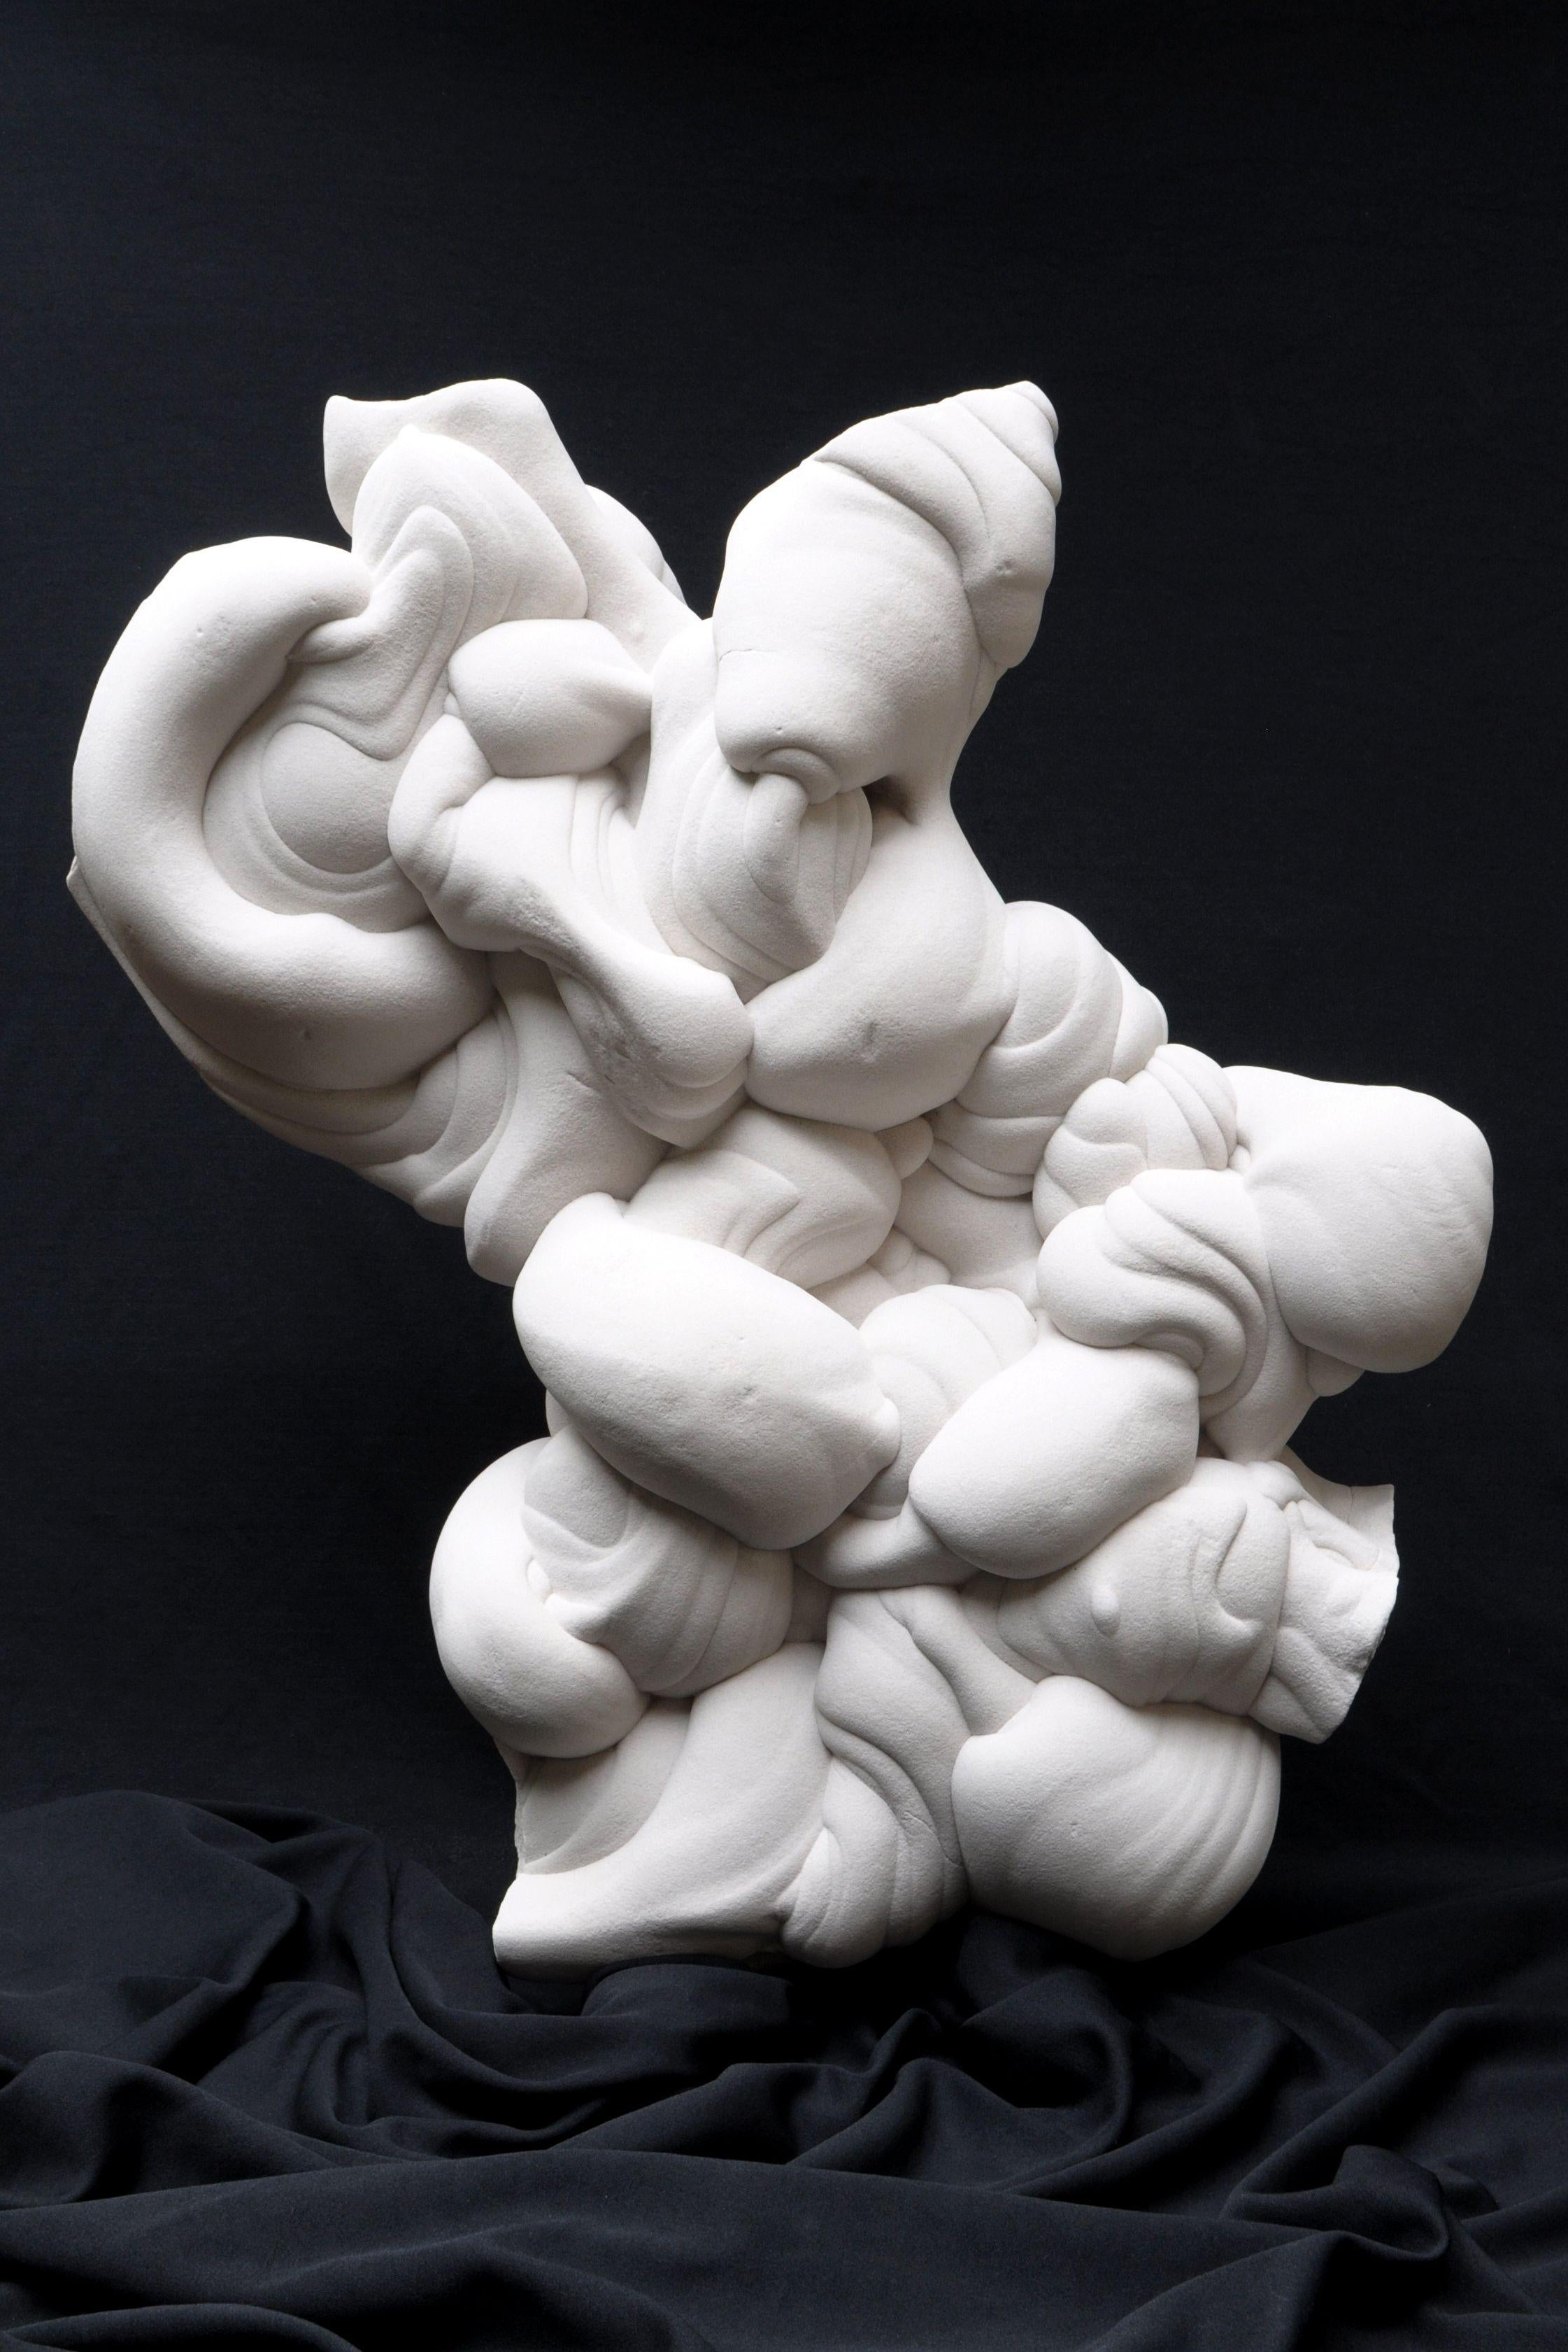 Gogotte Formation (Natural Sandstone Concretion) Abstract Sculpture - Invocation